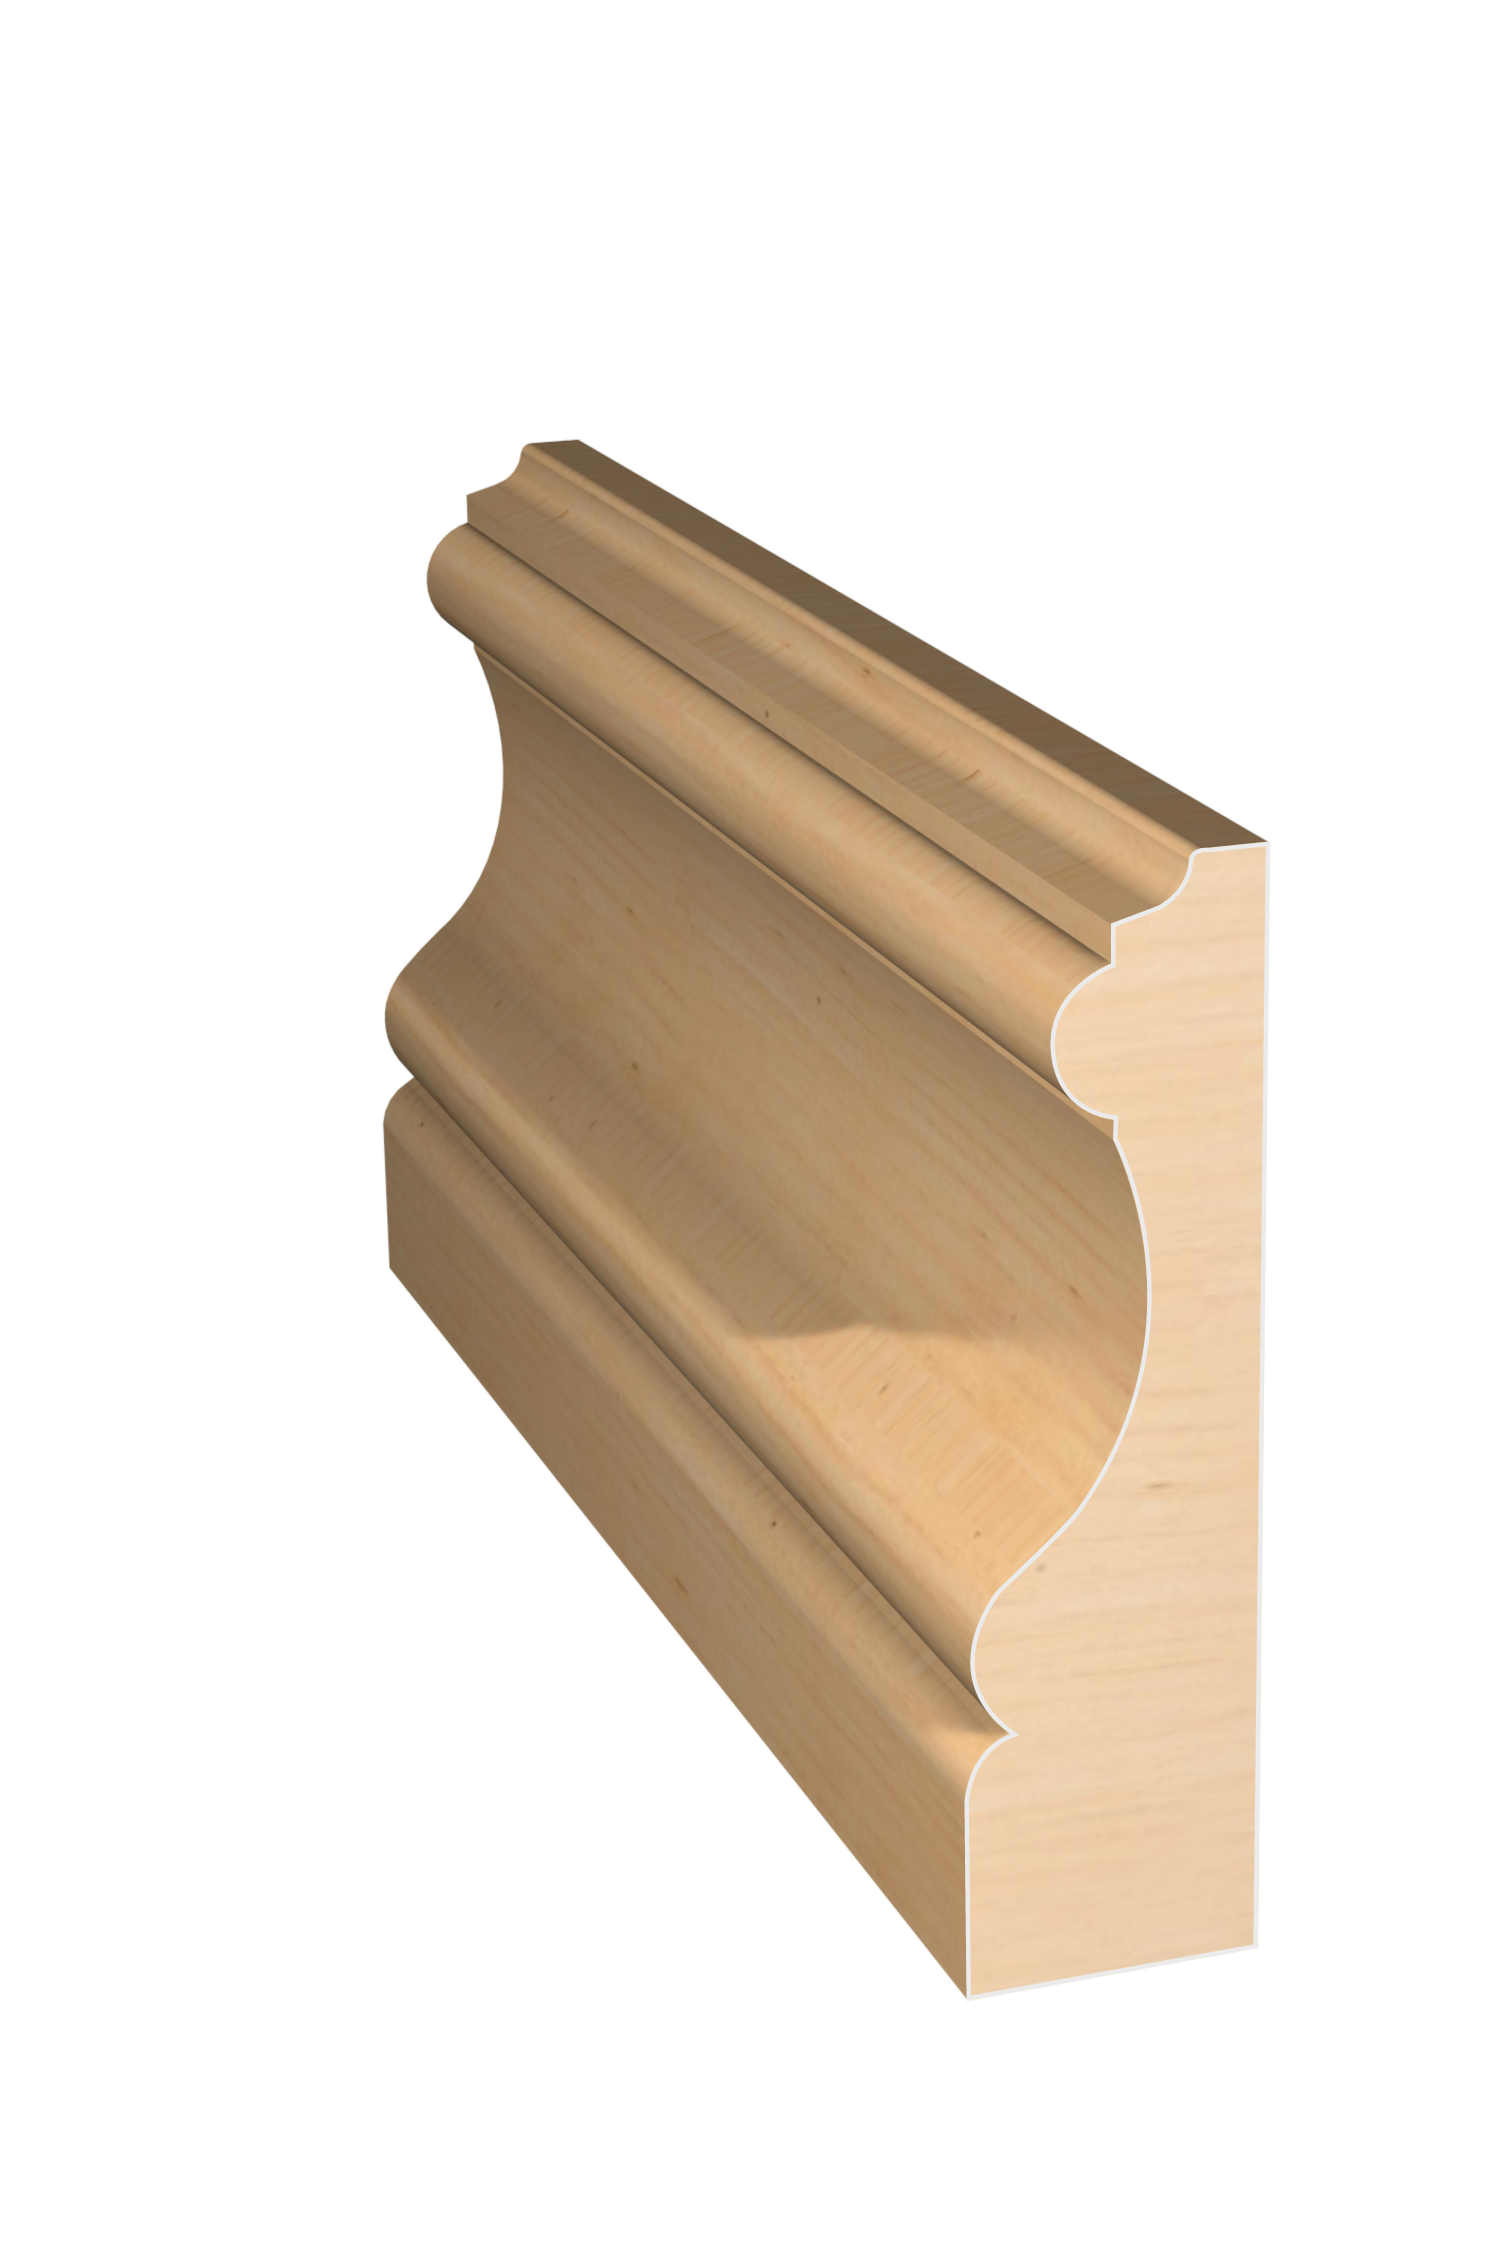 Three dimensional rendering of custom casing wood molding CAPL322 made by Public Lumber Company in Detroit.